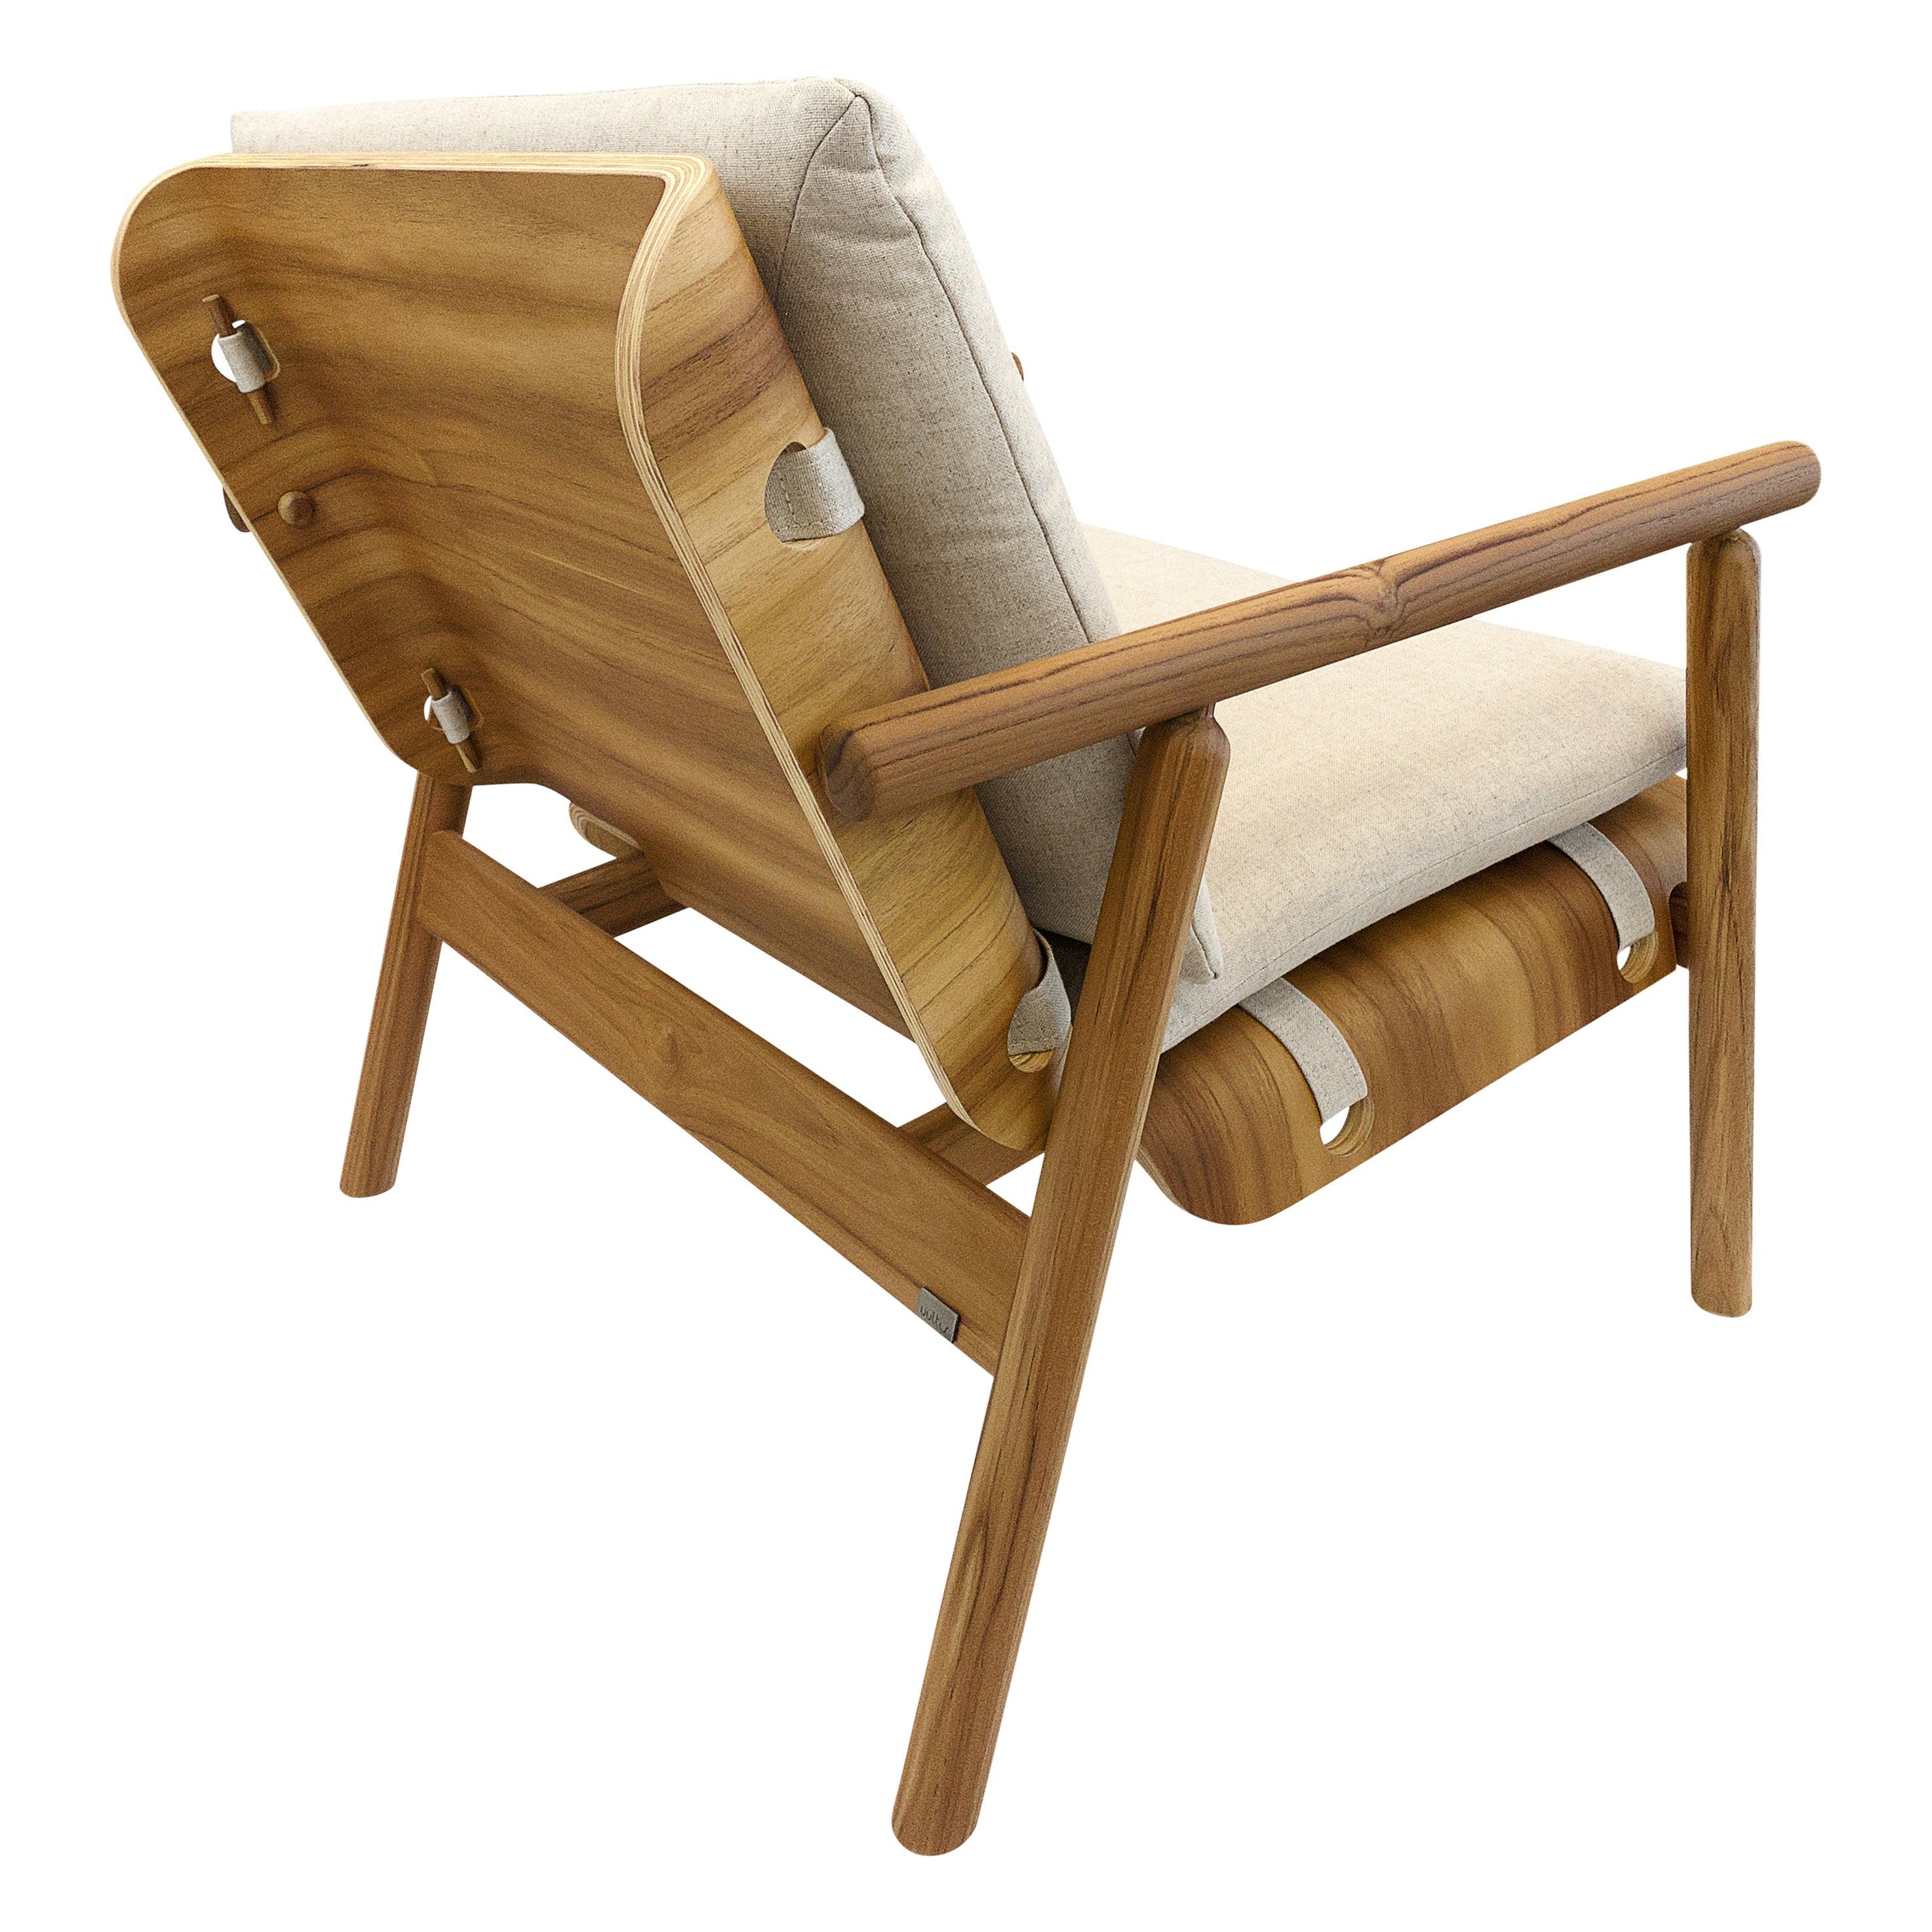 The Tai armchair has a lot going on but in a very simplistic way with the beautiful wood frame in a teak finish and its light beige fabric cushions. The unique 